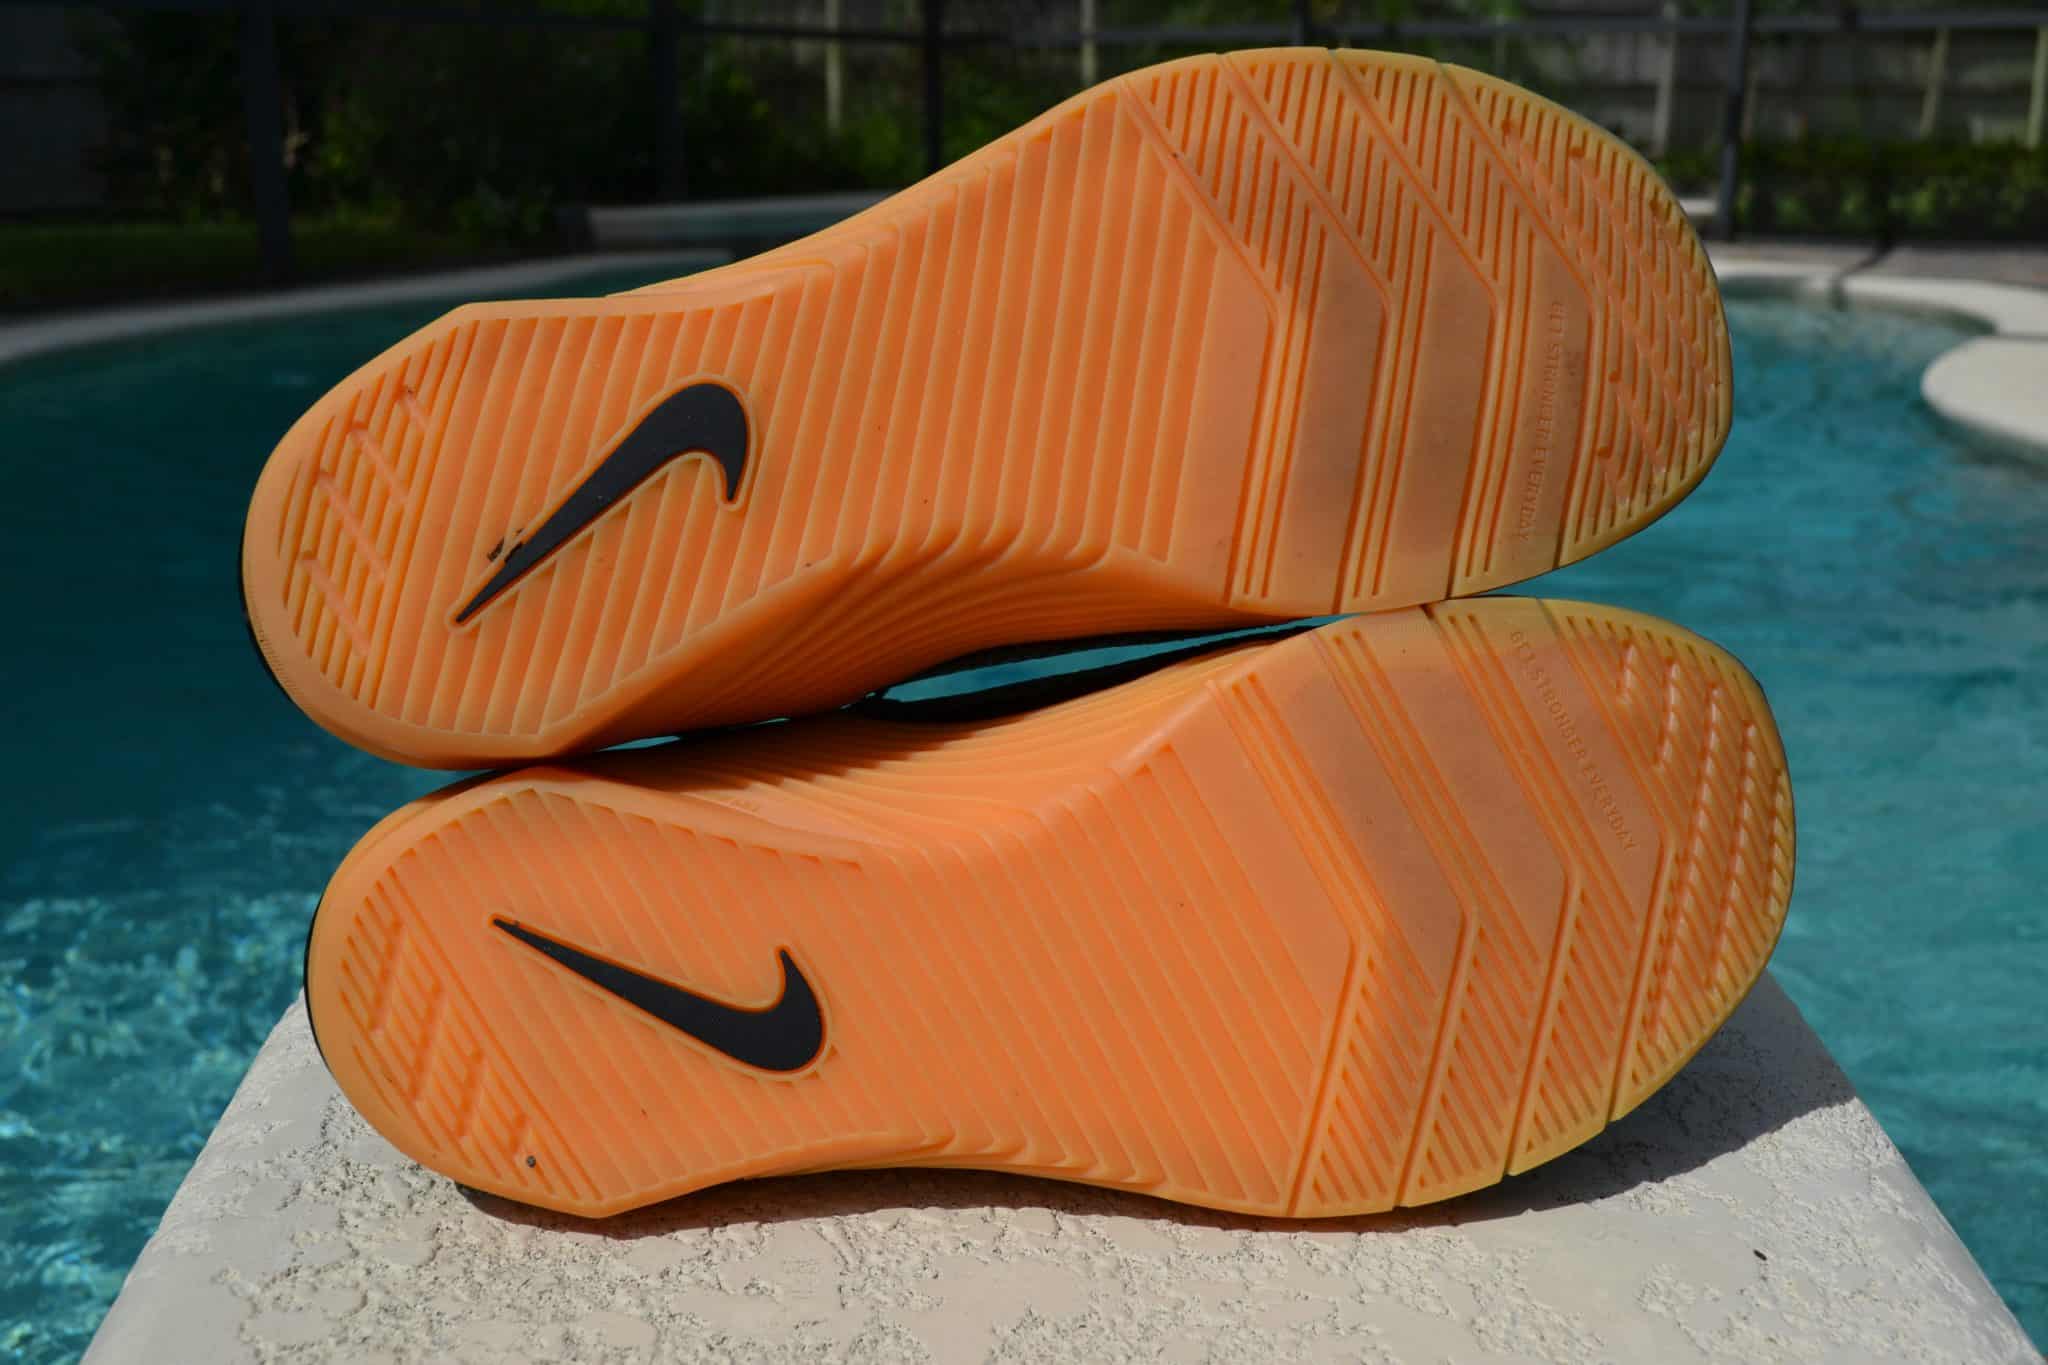 Nike Metcon 6 Shoe Review - Fit at Midlife